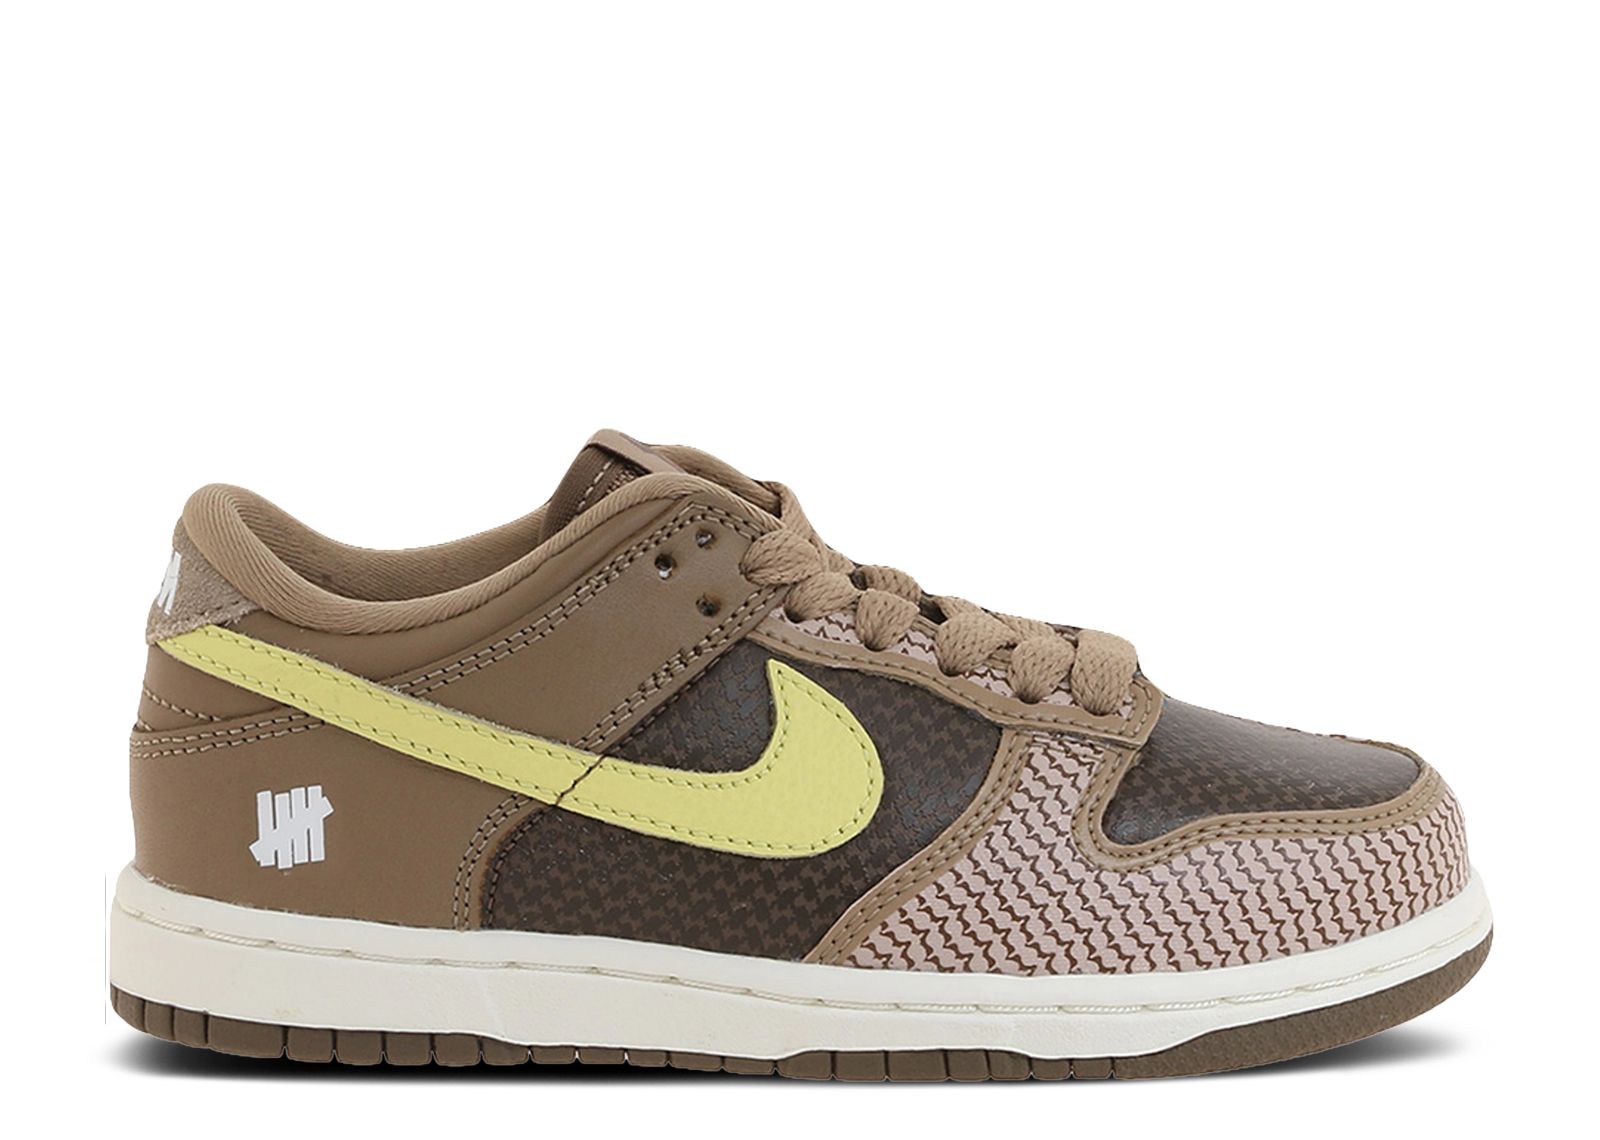 Кроссовки Nike Undefeated X Dunk Low Sp Ps 'Canteen', коричневый mx vs atv all out